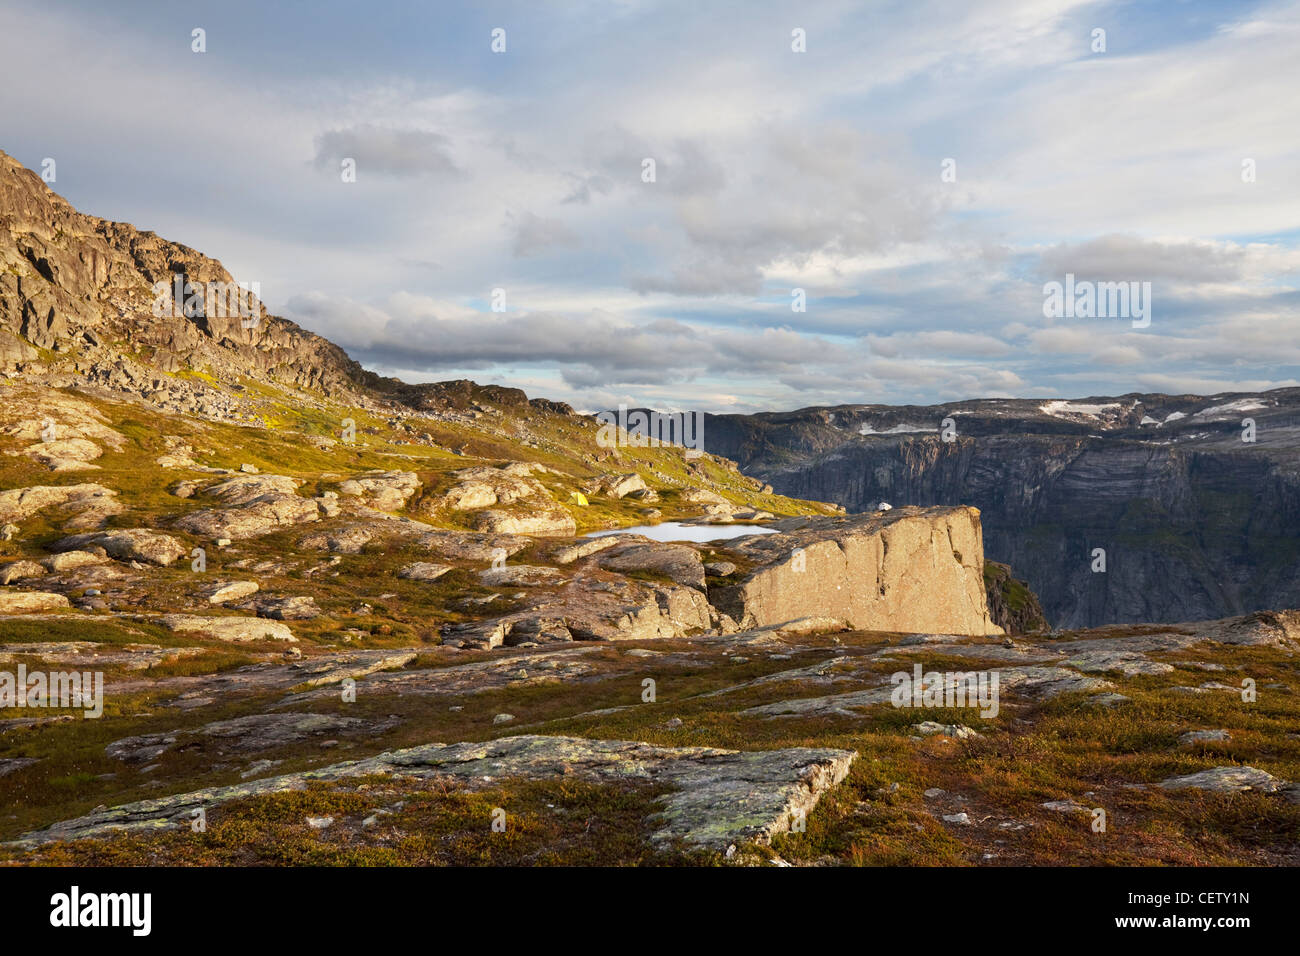 Norway landscapes Stock Photo